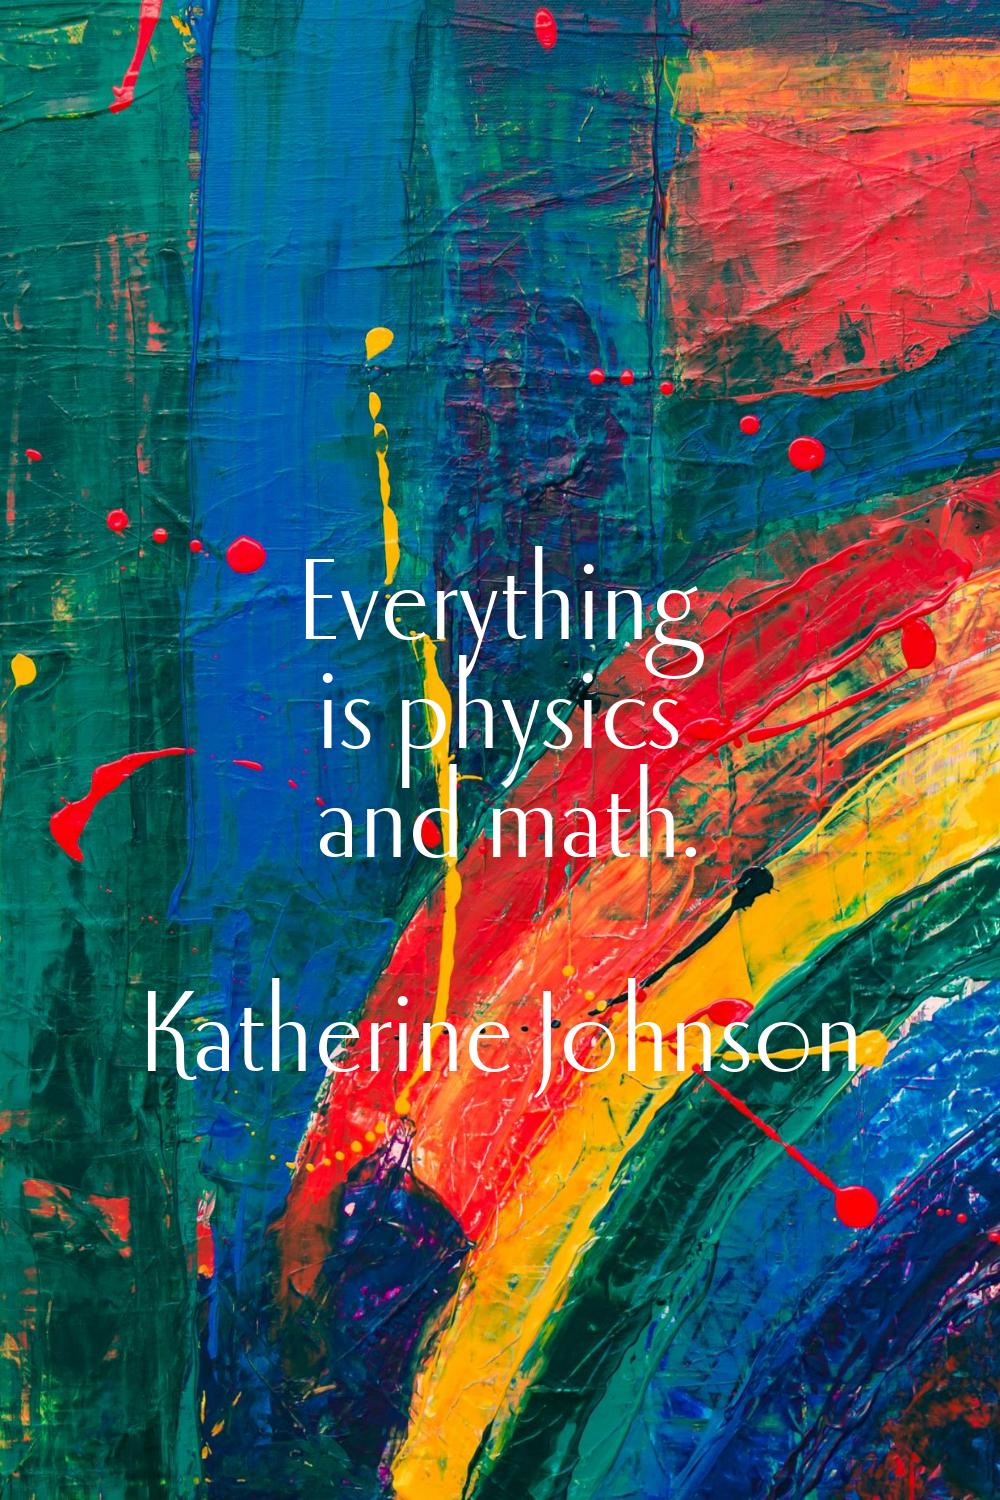 Everything is physics and math.